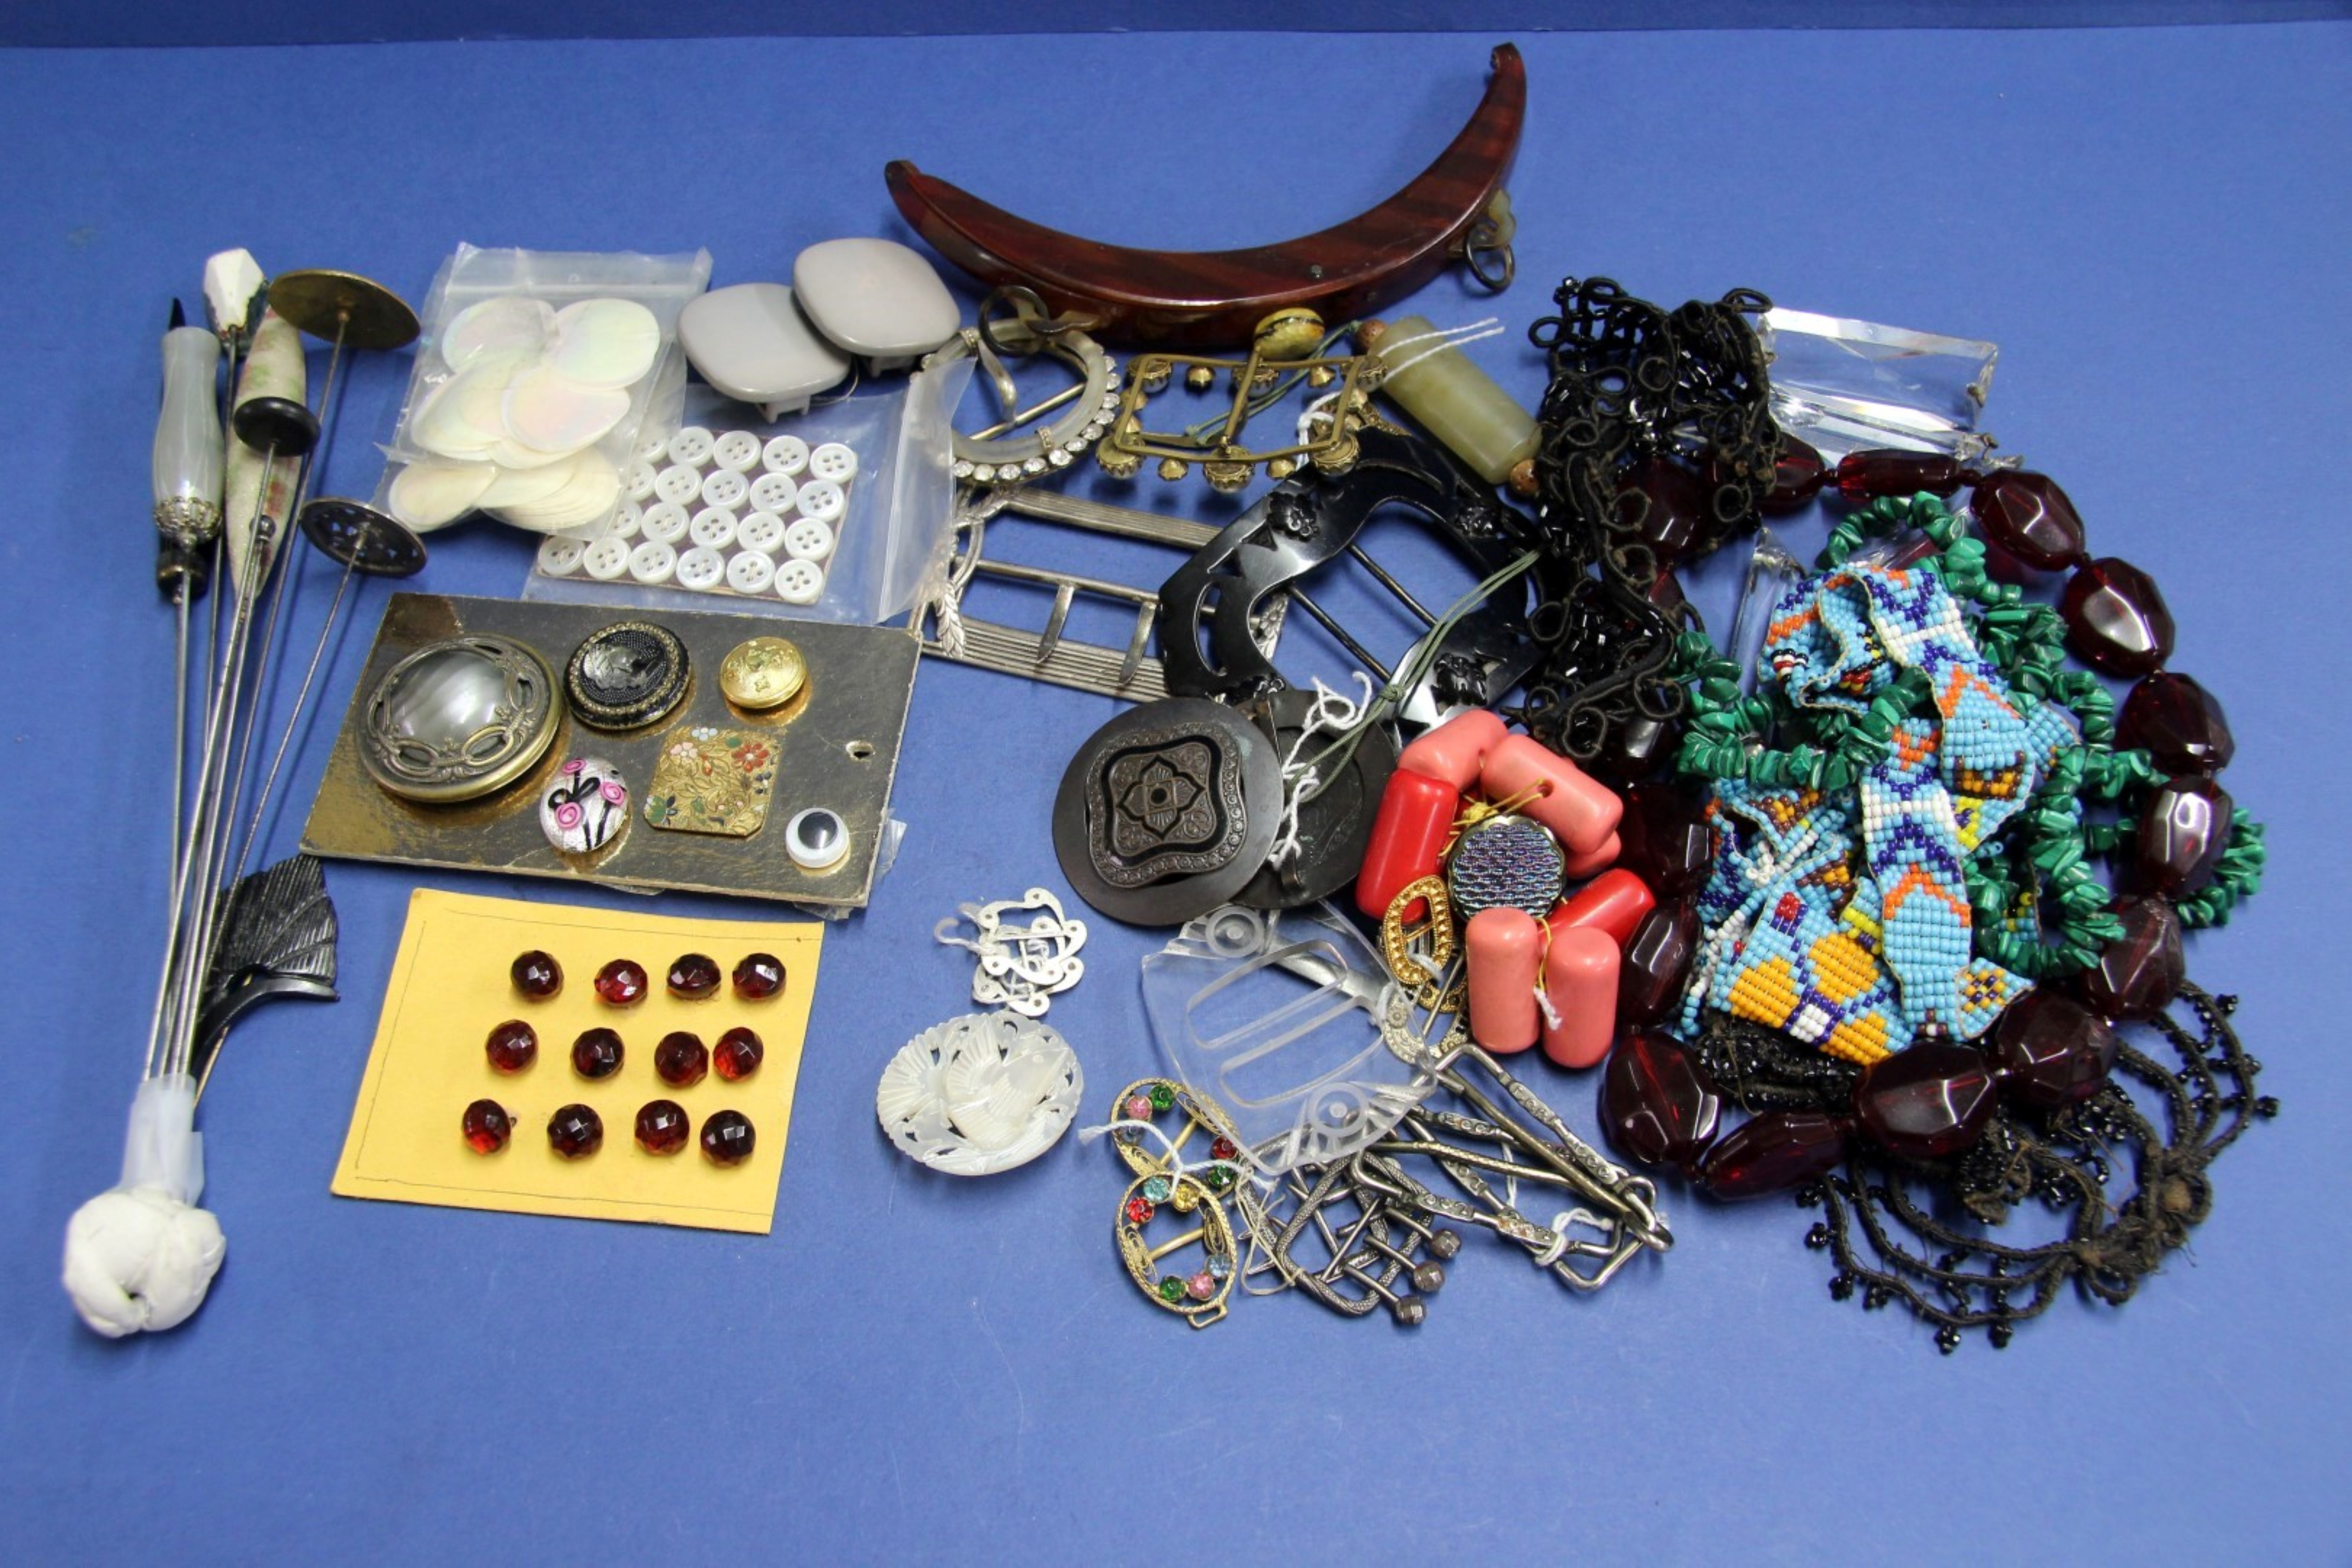 A collection of hat pins, buckles, and buttons.